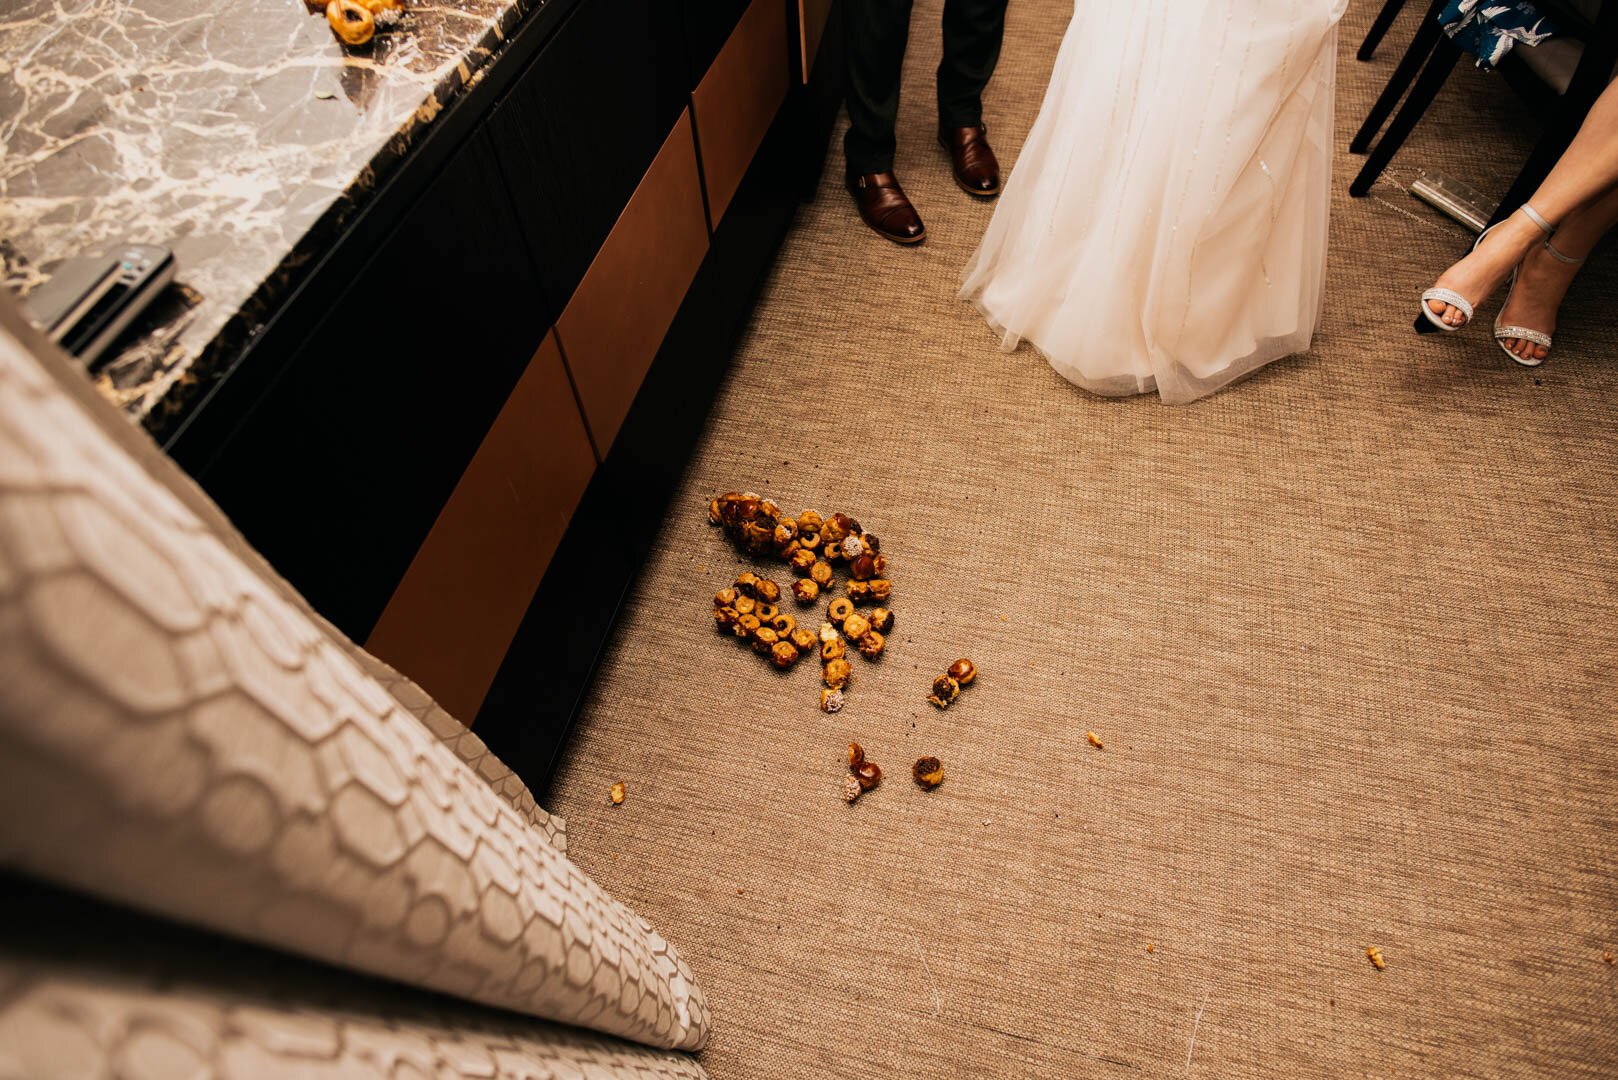 the wedding cake fell to the ground after the sabering